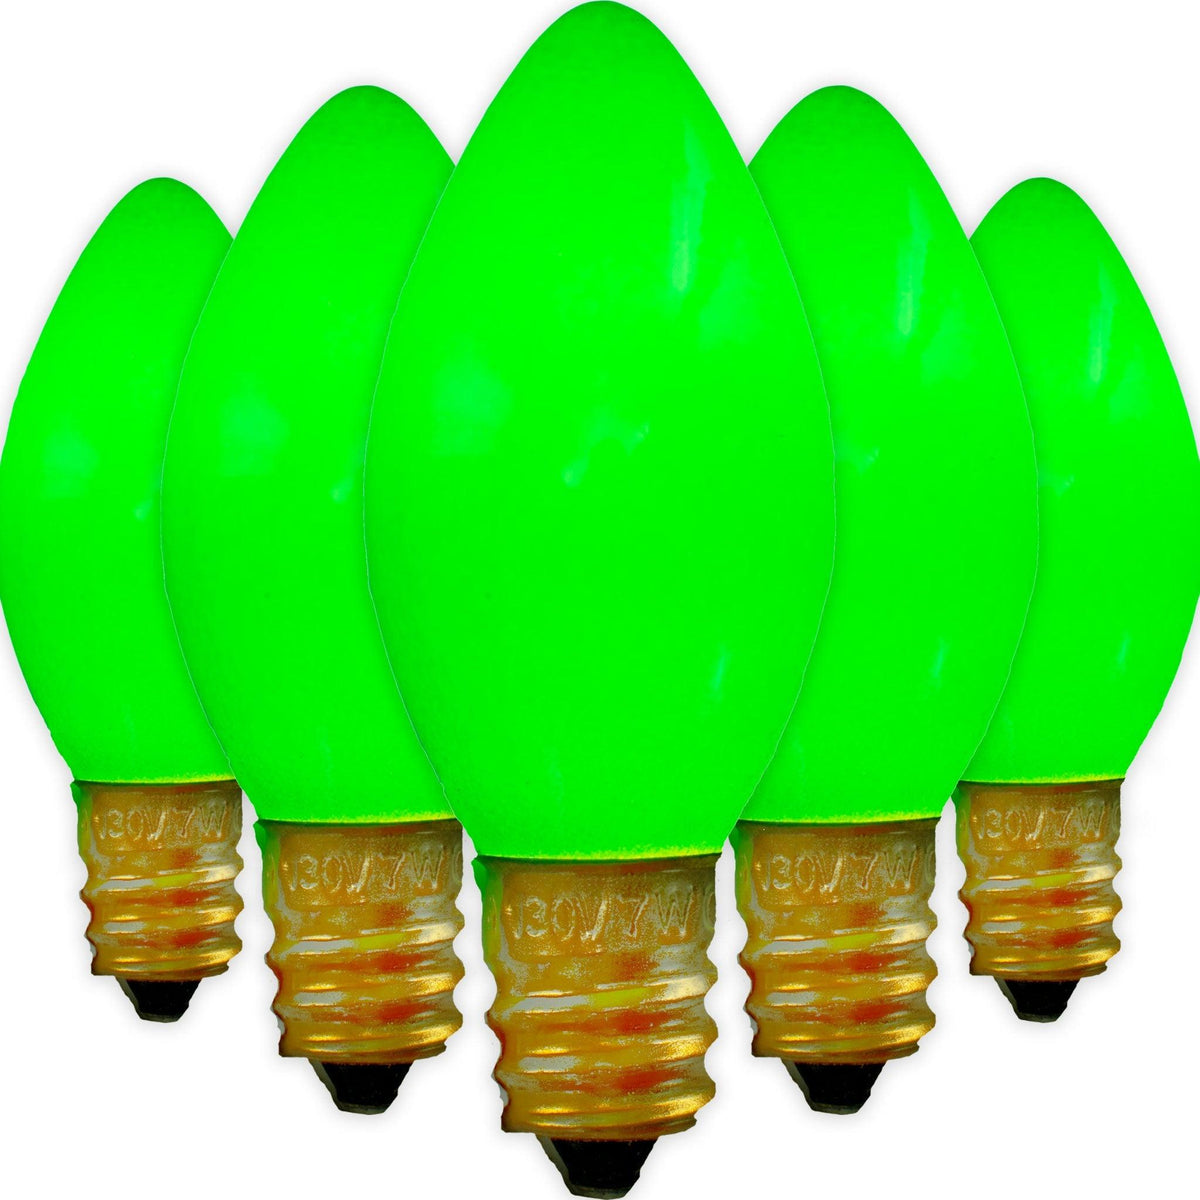 C-7 & C-9 Solid Ceramic Green Christmas Light Bulbs.  Replace your old bulbs with a set of brand new Candelabra Green Lights on sale leedisplay.com